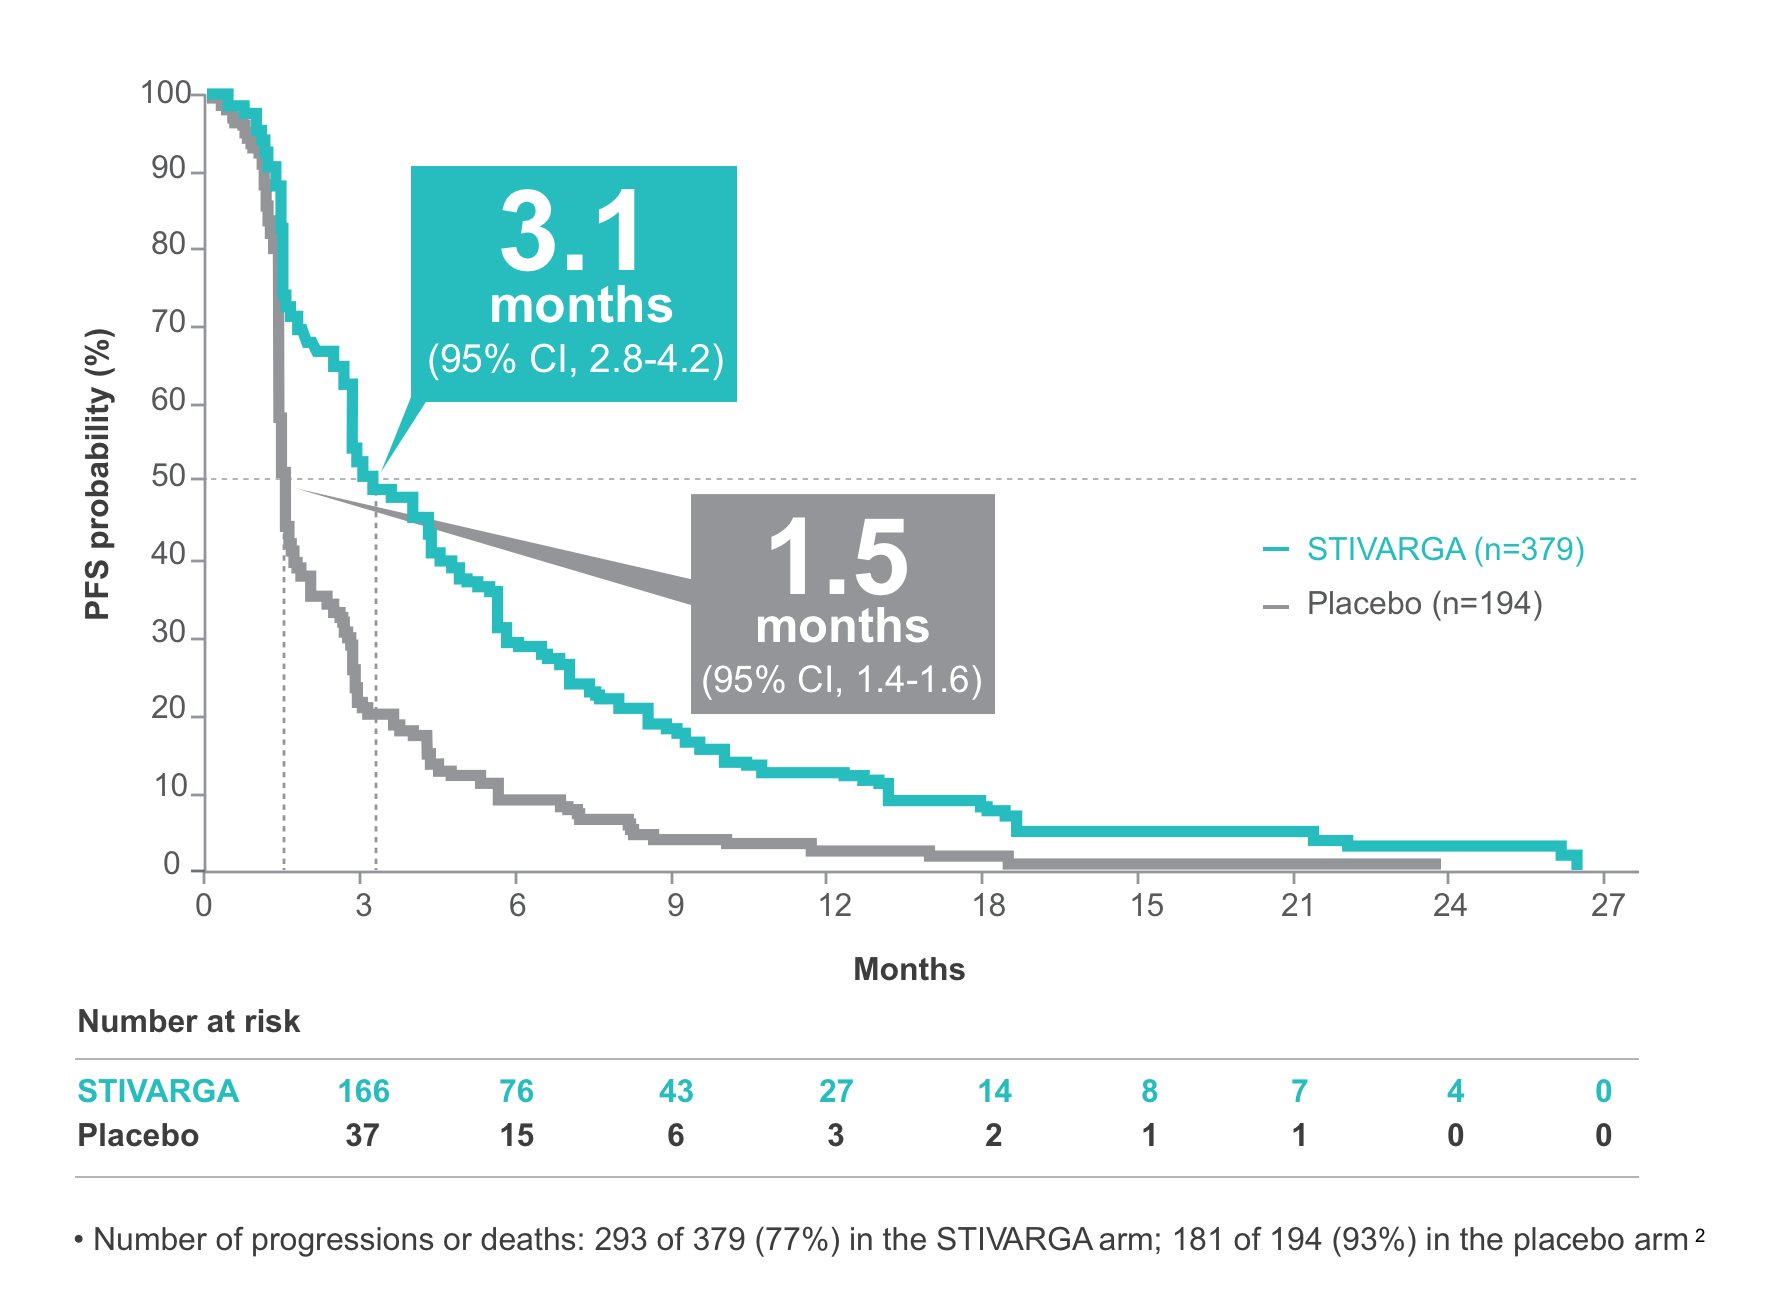 Line graph showing PFS results from STIVARGA (regorafenib) RESORCE trial and highlighting a 54% reduction in risk of progression or death.